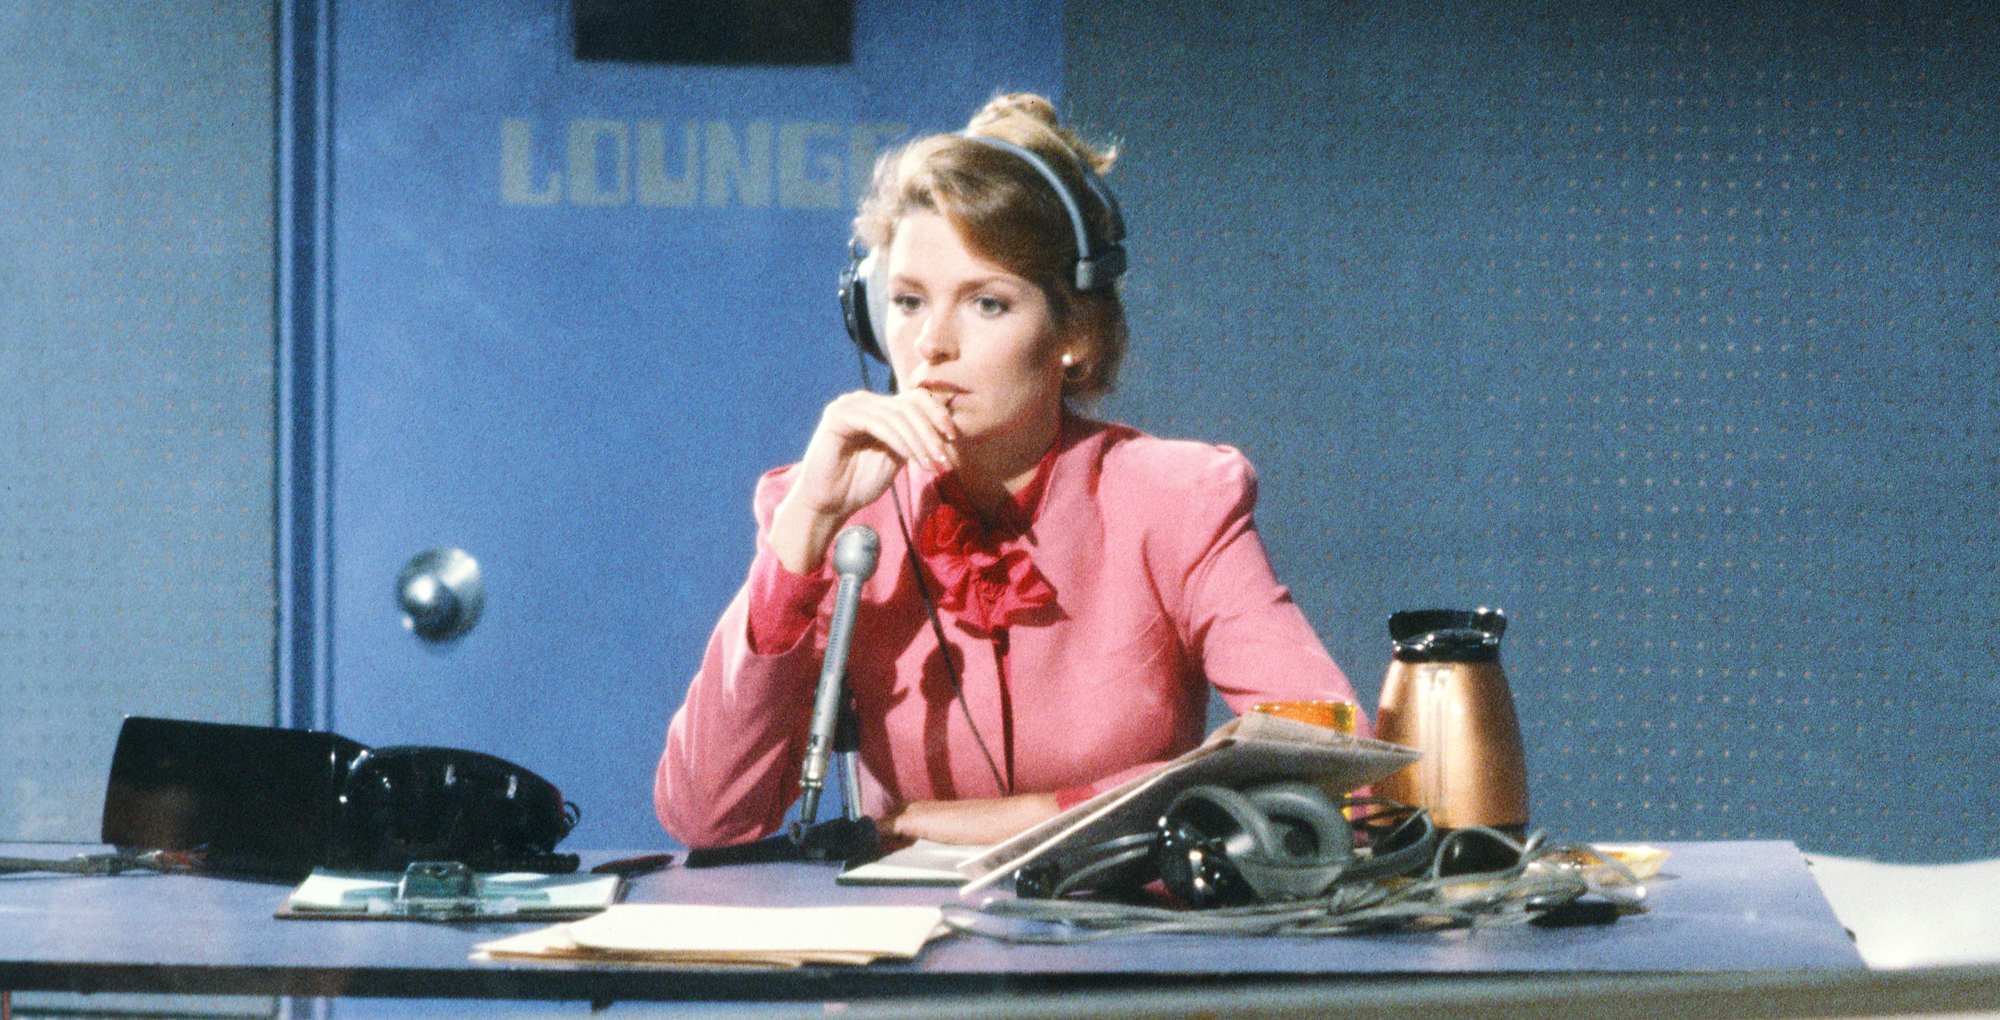 dr. marlena evans back in the early 80s working on her radio show wearing pink against a blue wall